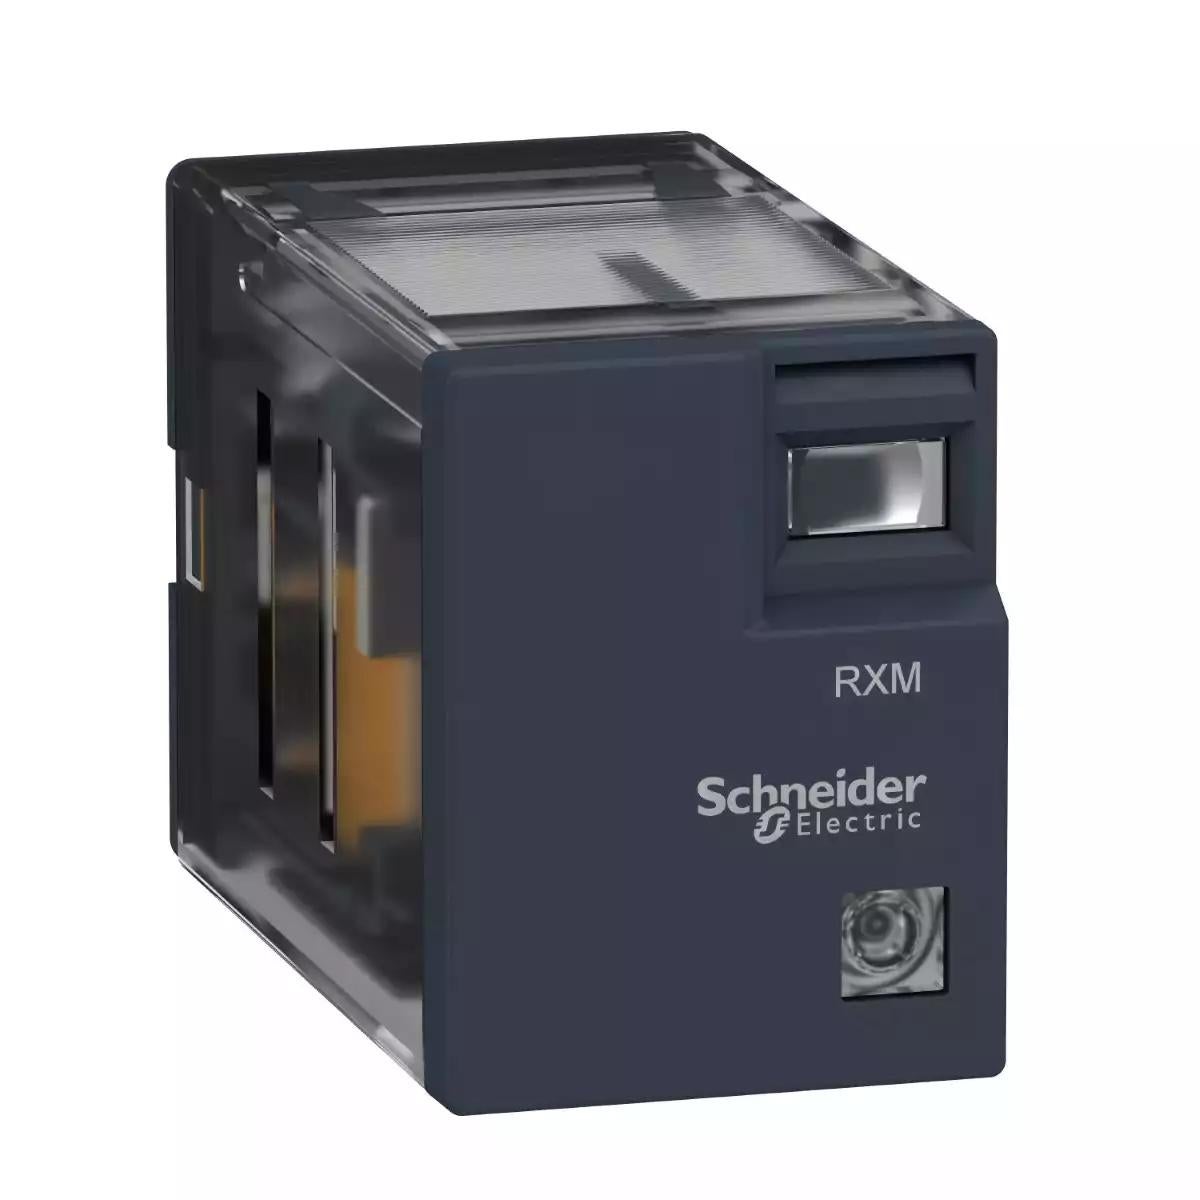 Schneider Electric miniature plug-in relay - Zelio RXM4L - 4 C/O - 12 V DC - 3 A - with LED